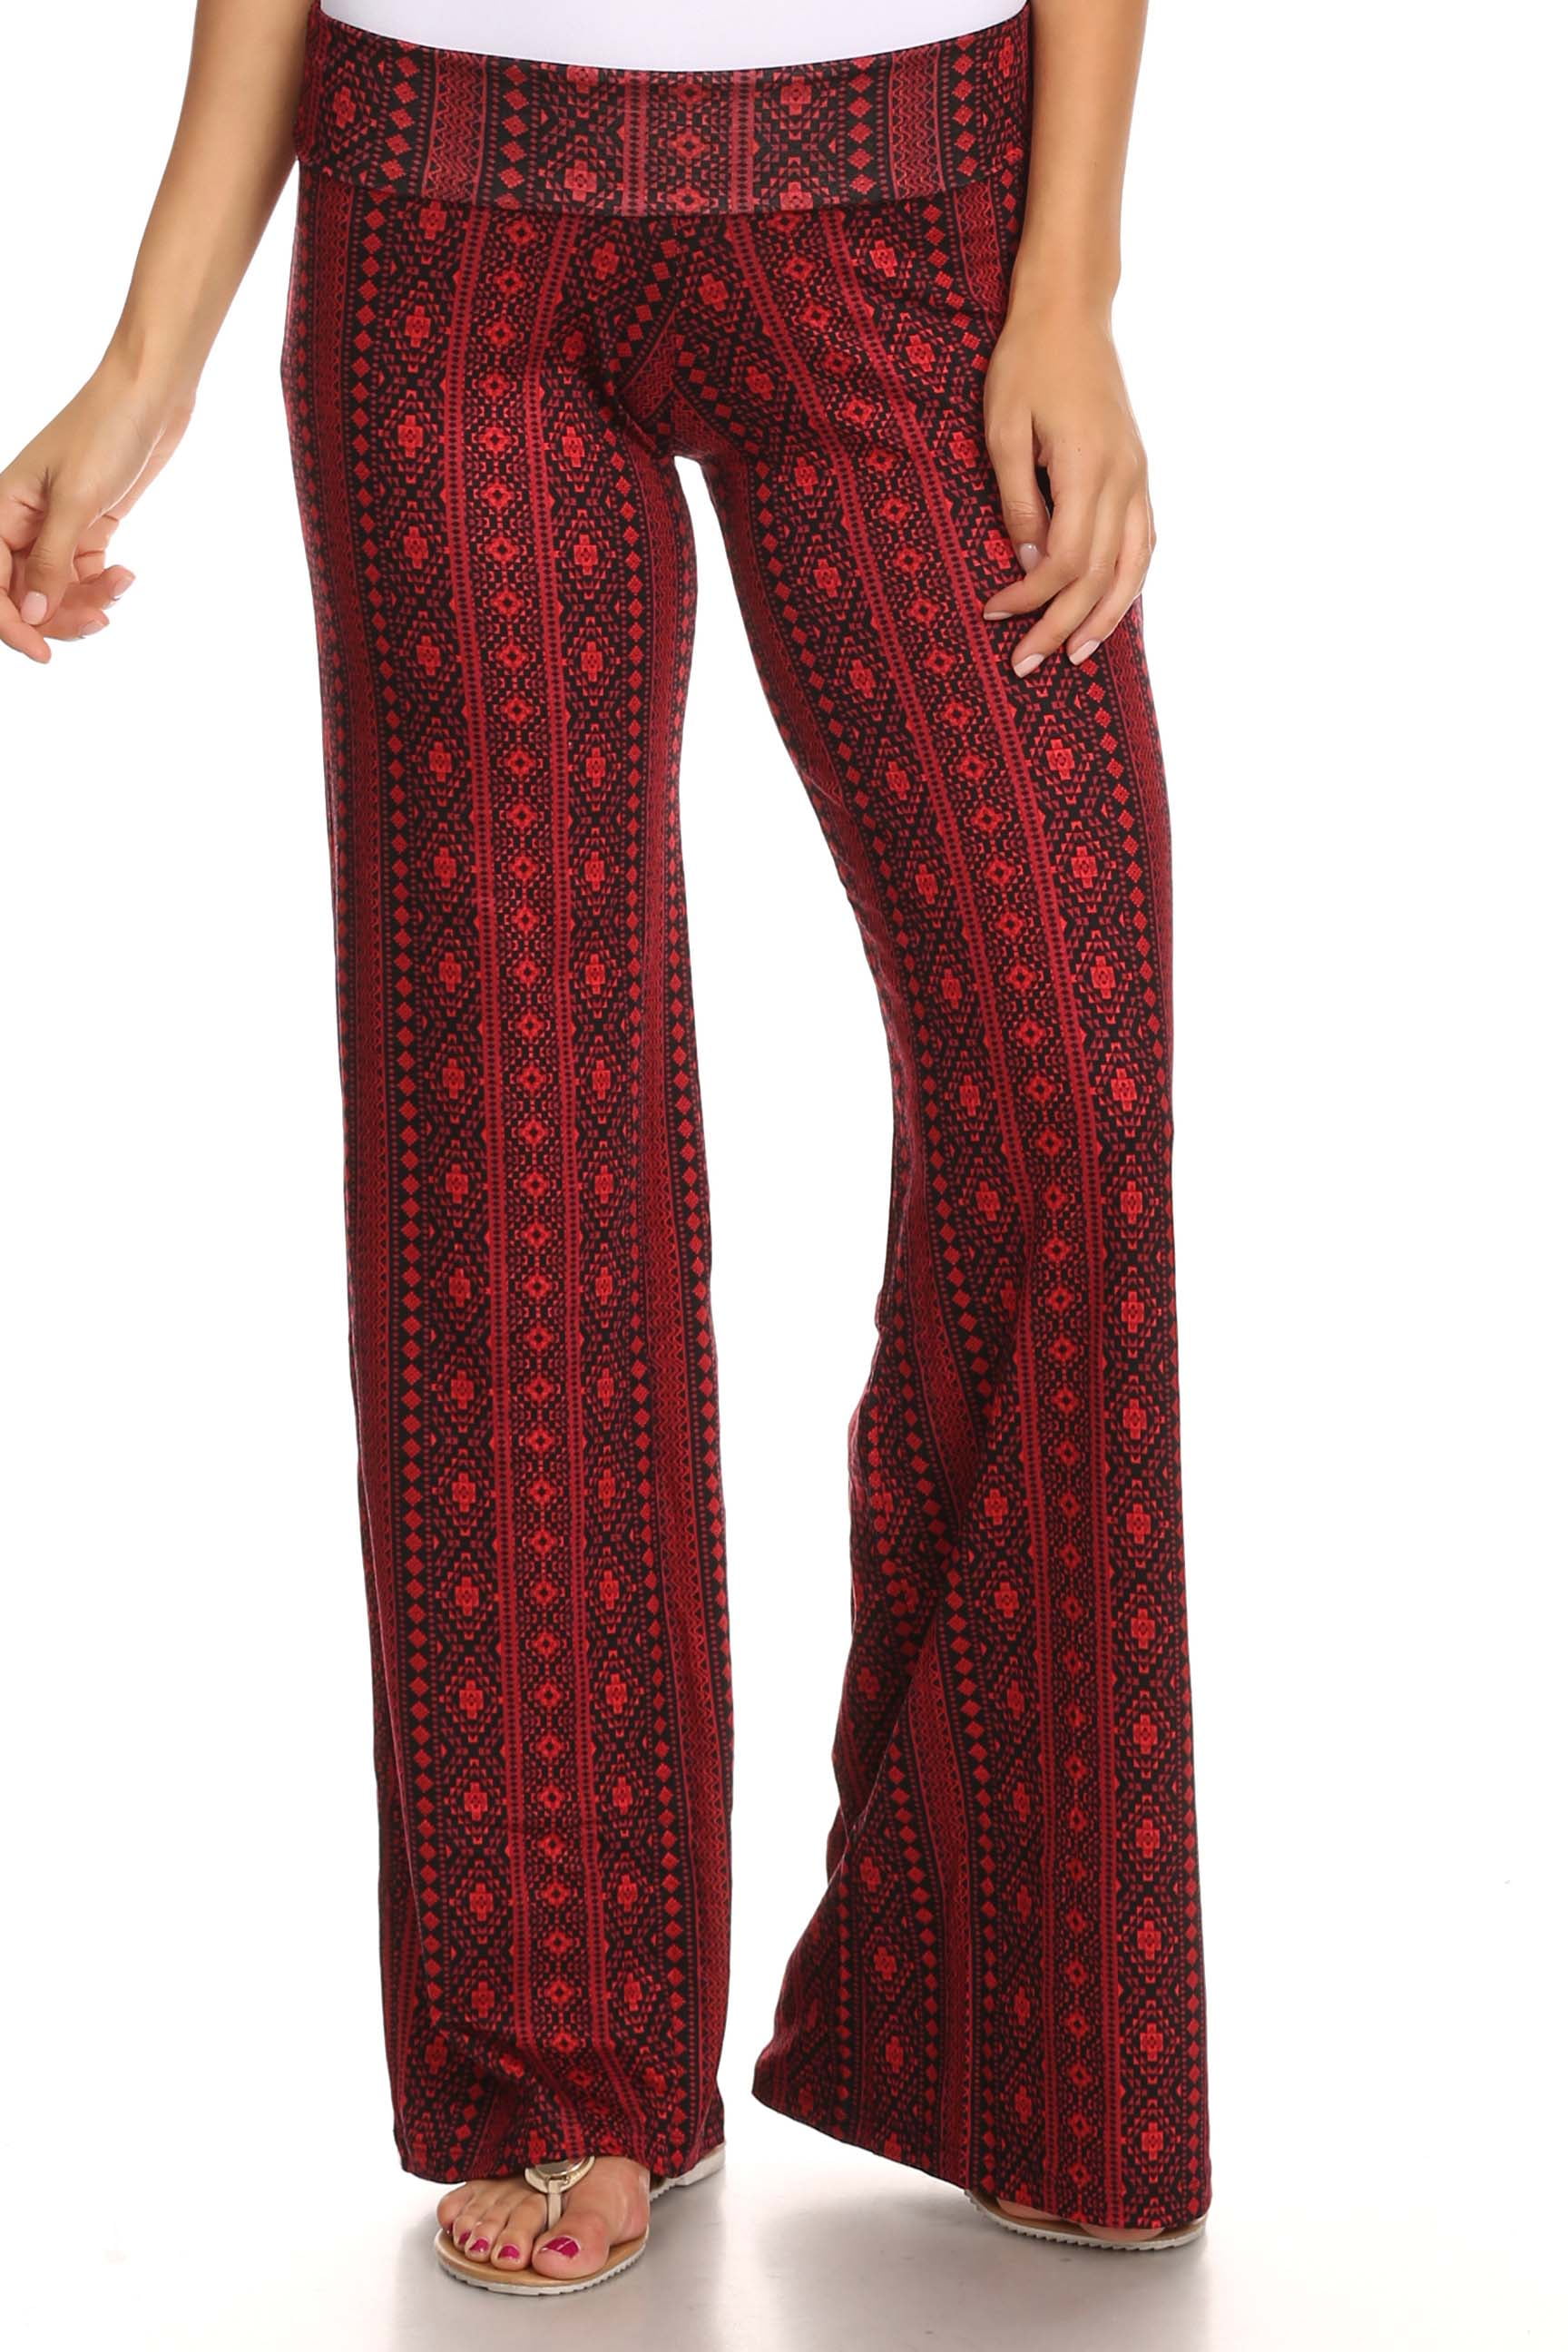 Sharon's Outlet - Women's Tribal Burgundy Printed Palazzo Pants Made in ...